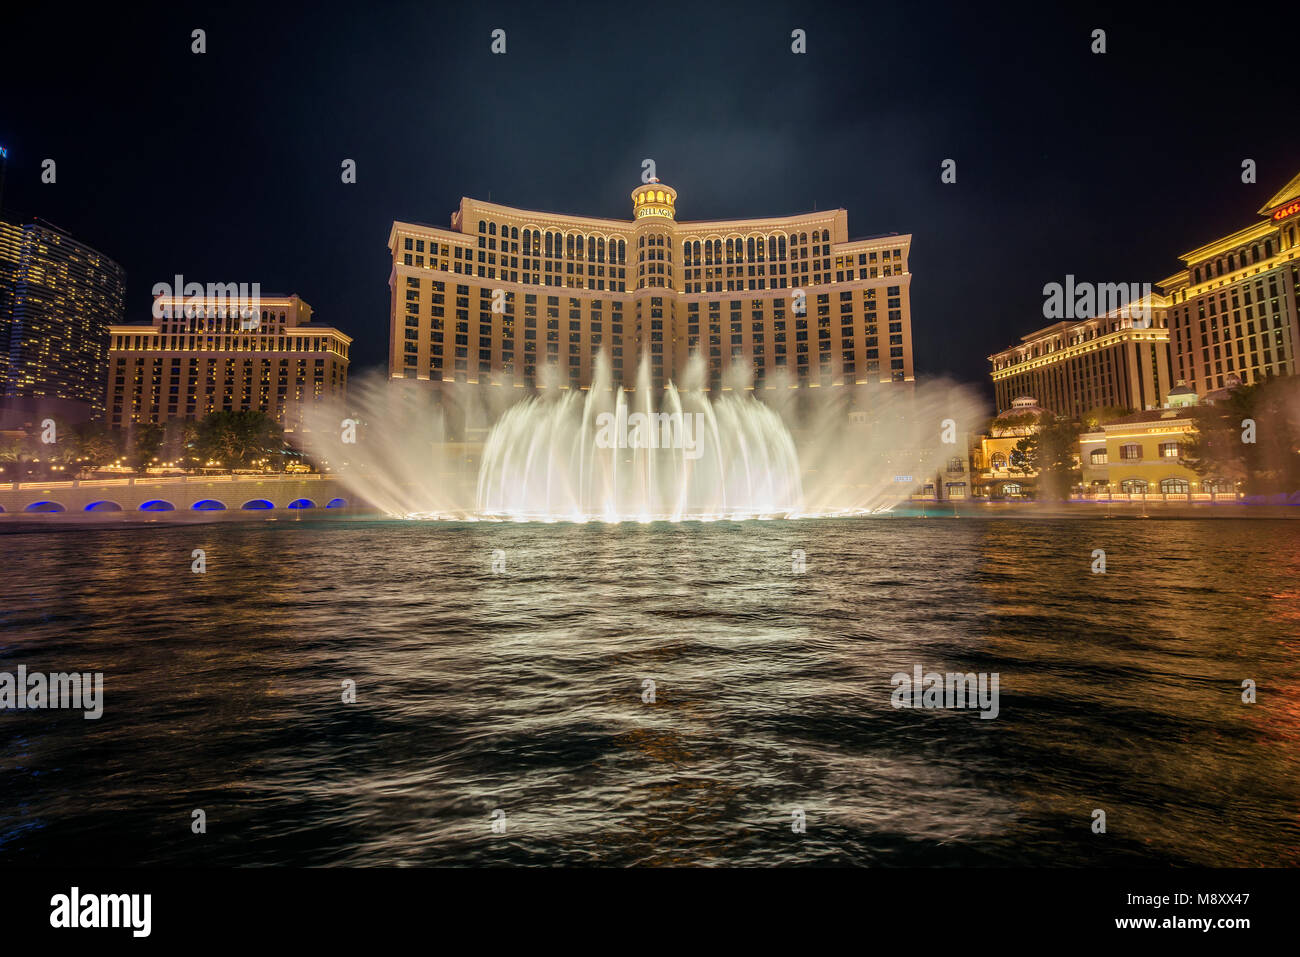 The Fountains of Bellagio at night in Las Vegas Stock Photo